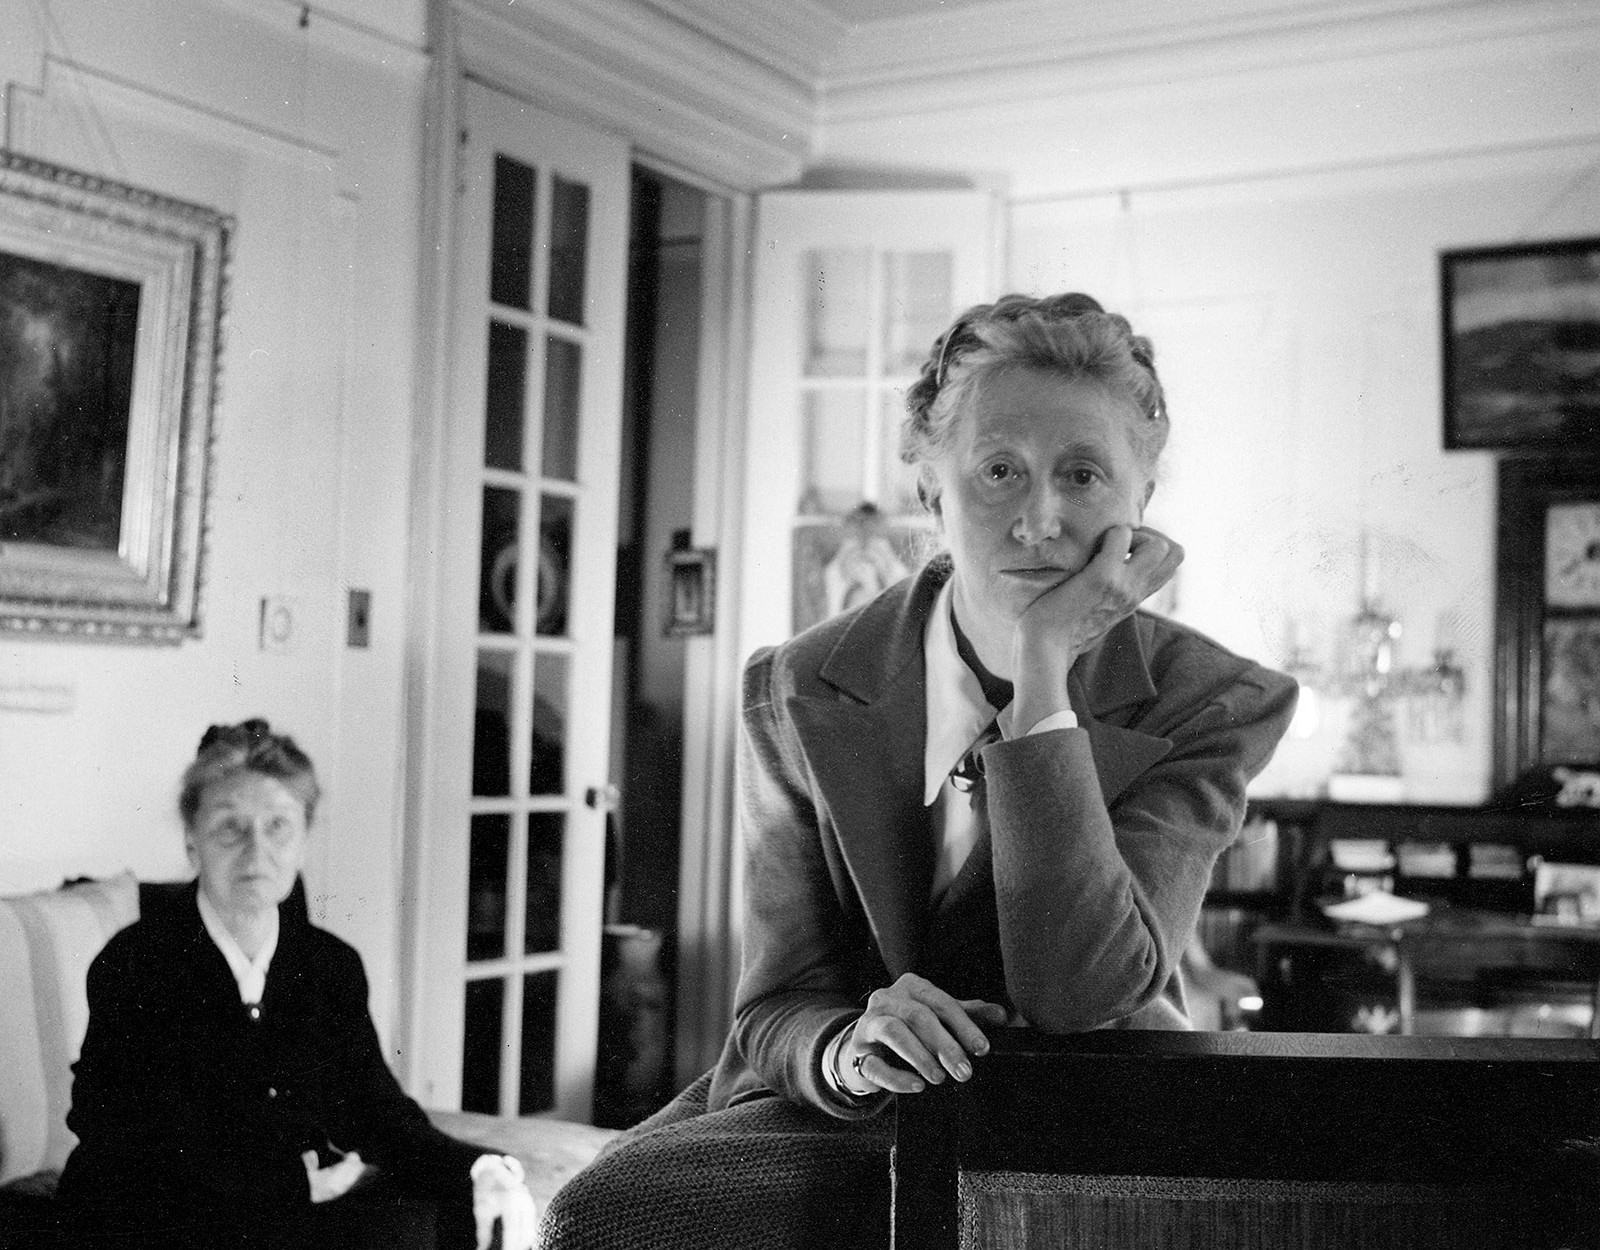 The mystery of Marianne Moore